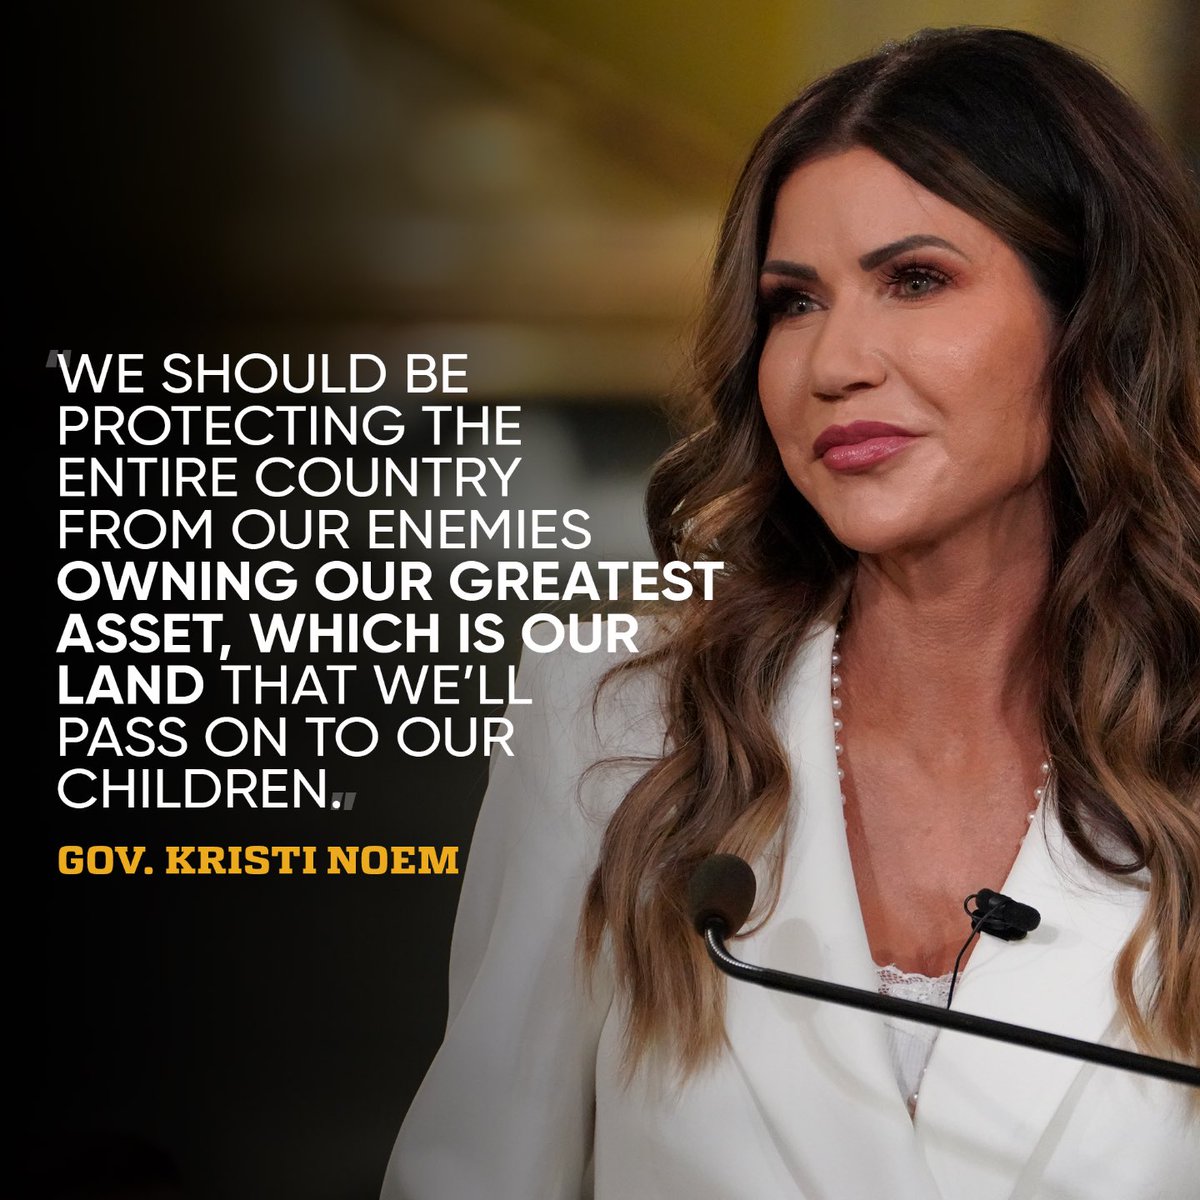 @govkristinoem so much in your statement of fascism, racism, ignorance, and bigotry.
Also - you’ve entered the realm of no return on your injections/procedures/facial reconstruction. The smirk is permanent. Ugliness and cruelty go hand in hand.

#Landback 
#HonorTheTreaties